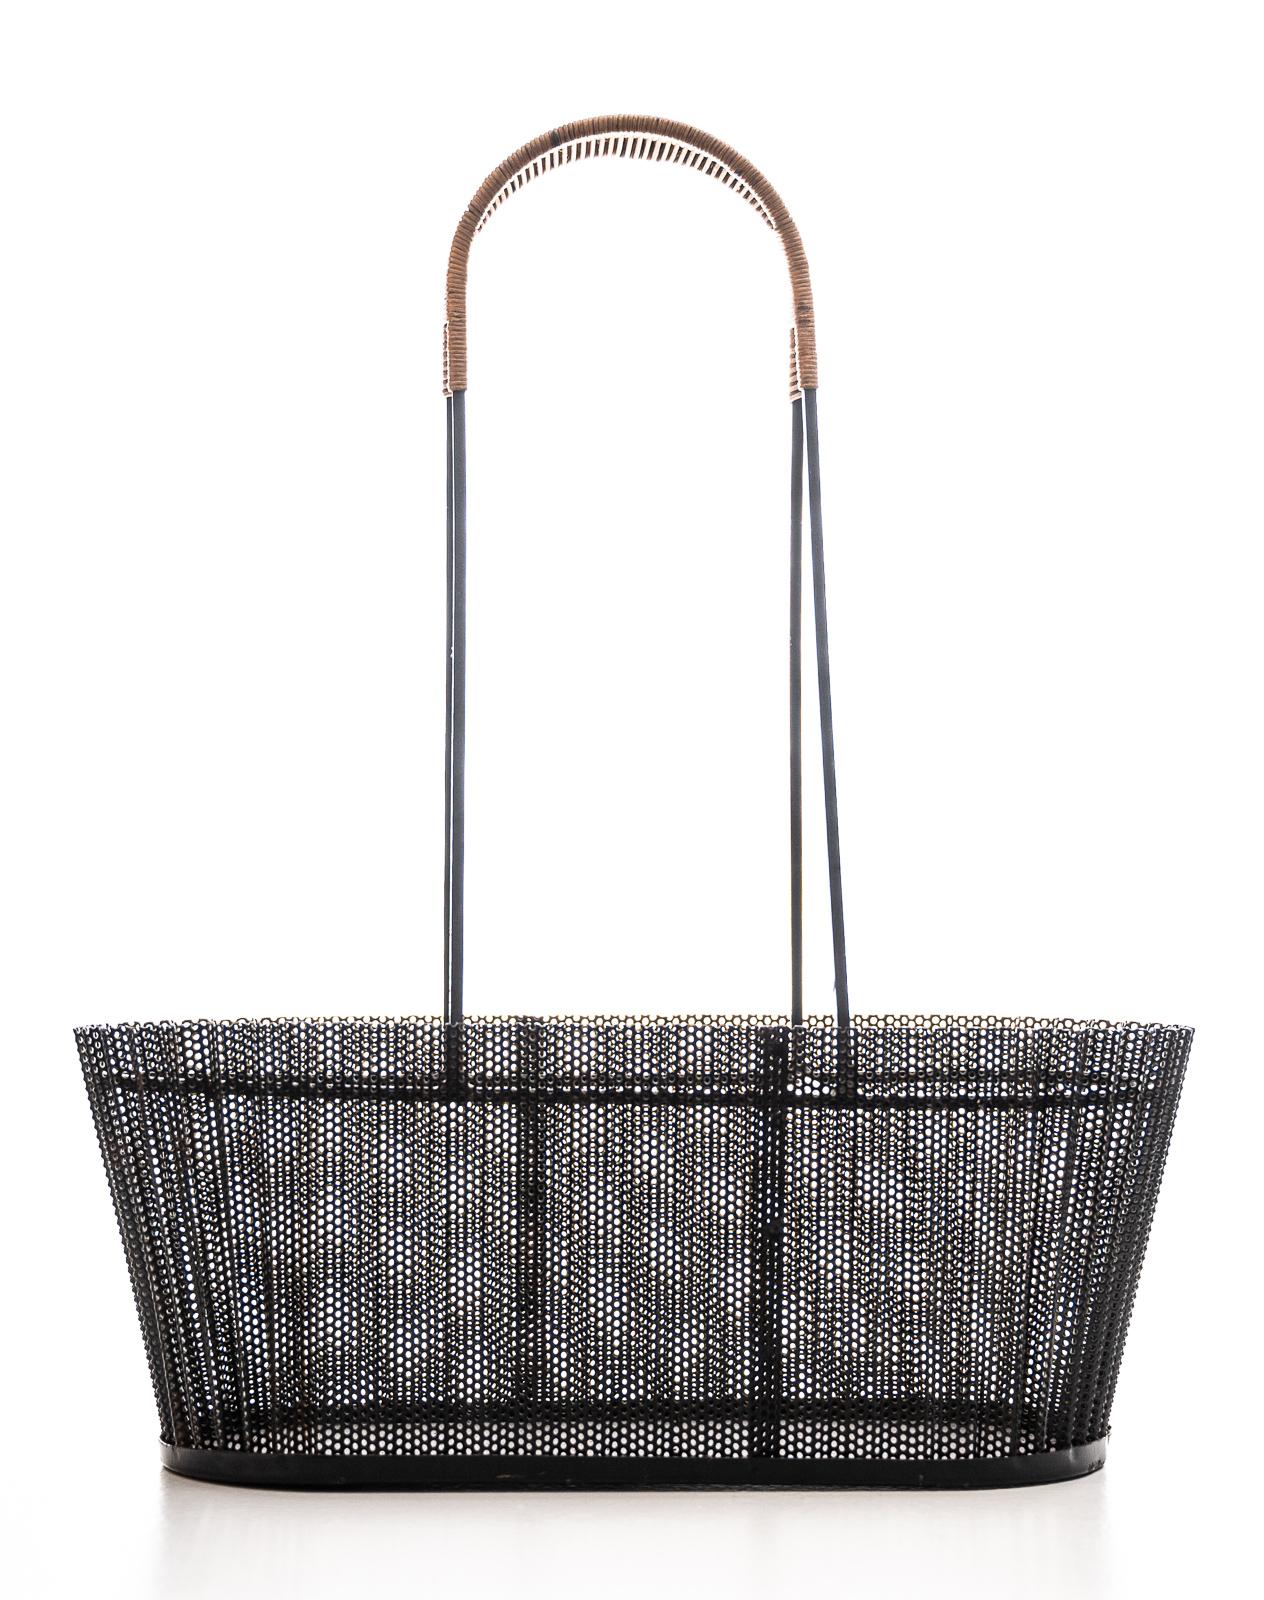 Rare Metal Basket with Wicker Handles by Mathieu Matégot In Good Condition In Henley-on Thames, Oxfordshire